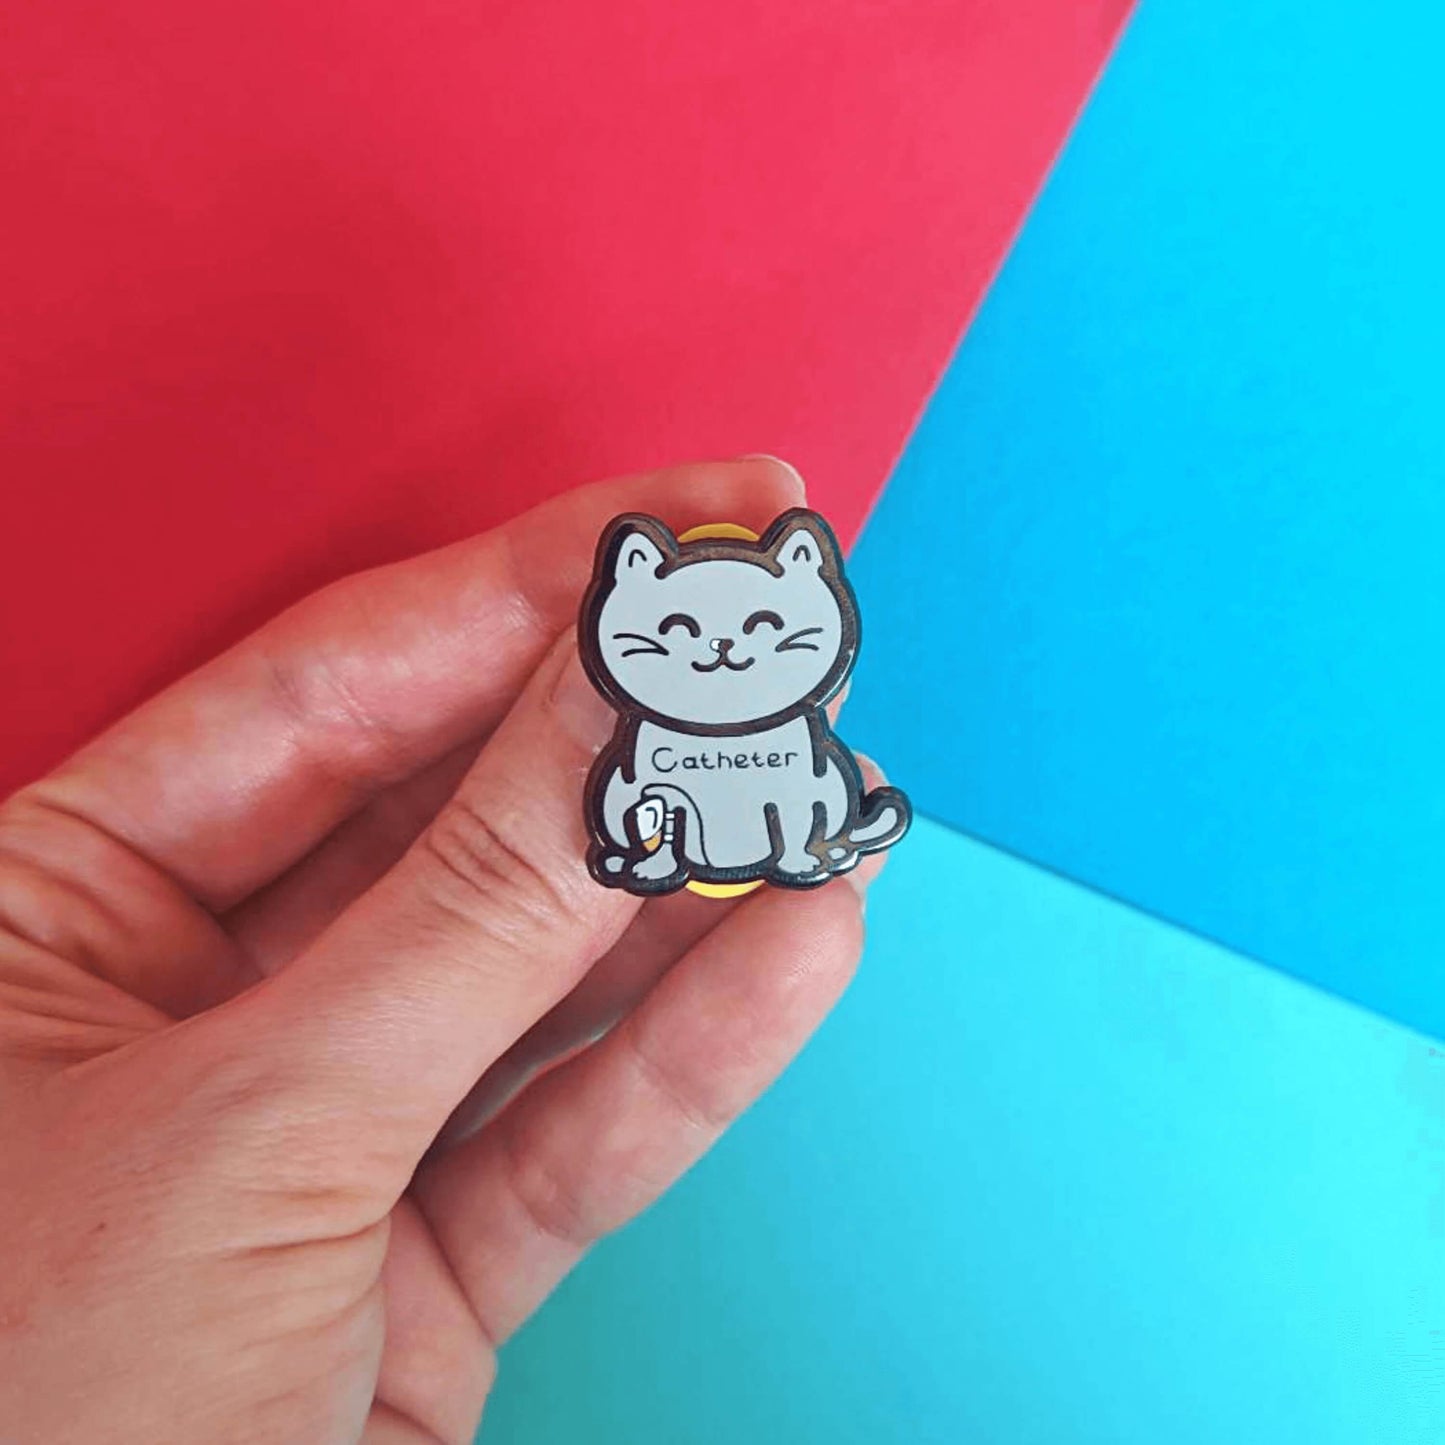 The Catheter Enamel Pin - Catheter being held over a red and blue background. The pin is a grey smiling cat sat down with a urine drainage Urostomy pouch strapped to its right leg and text across its chest reading 'catheter'. The pin is designed to raise awareness for bladder problems such as UTIs and other chronic illnesses.